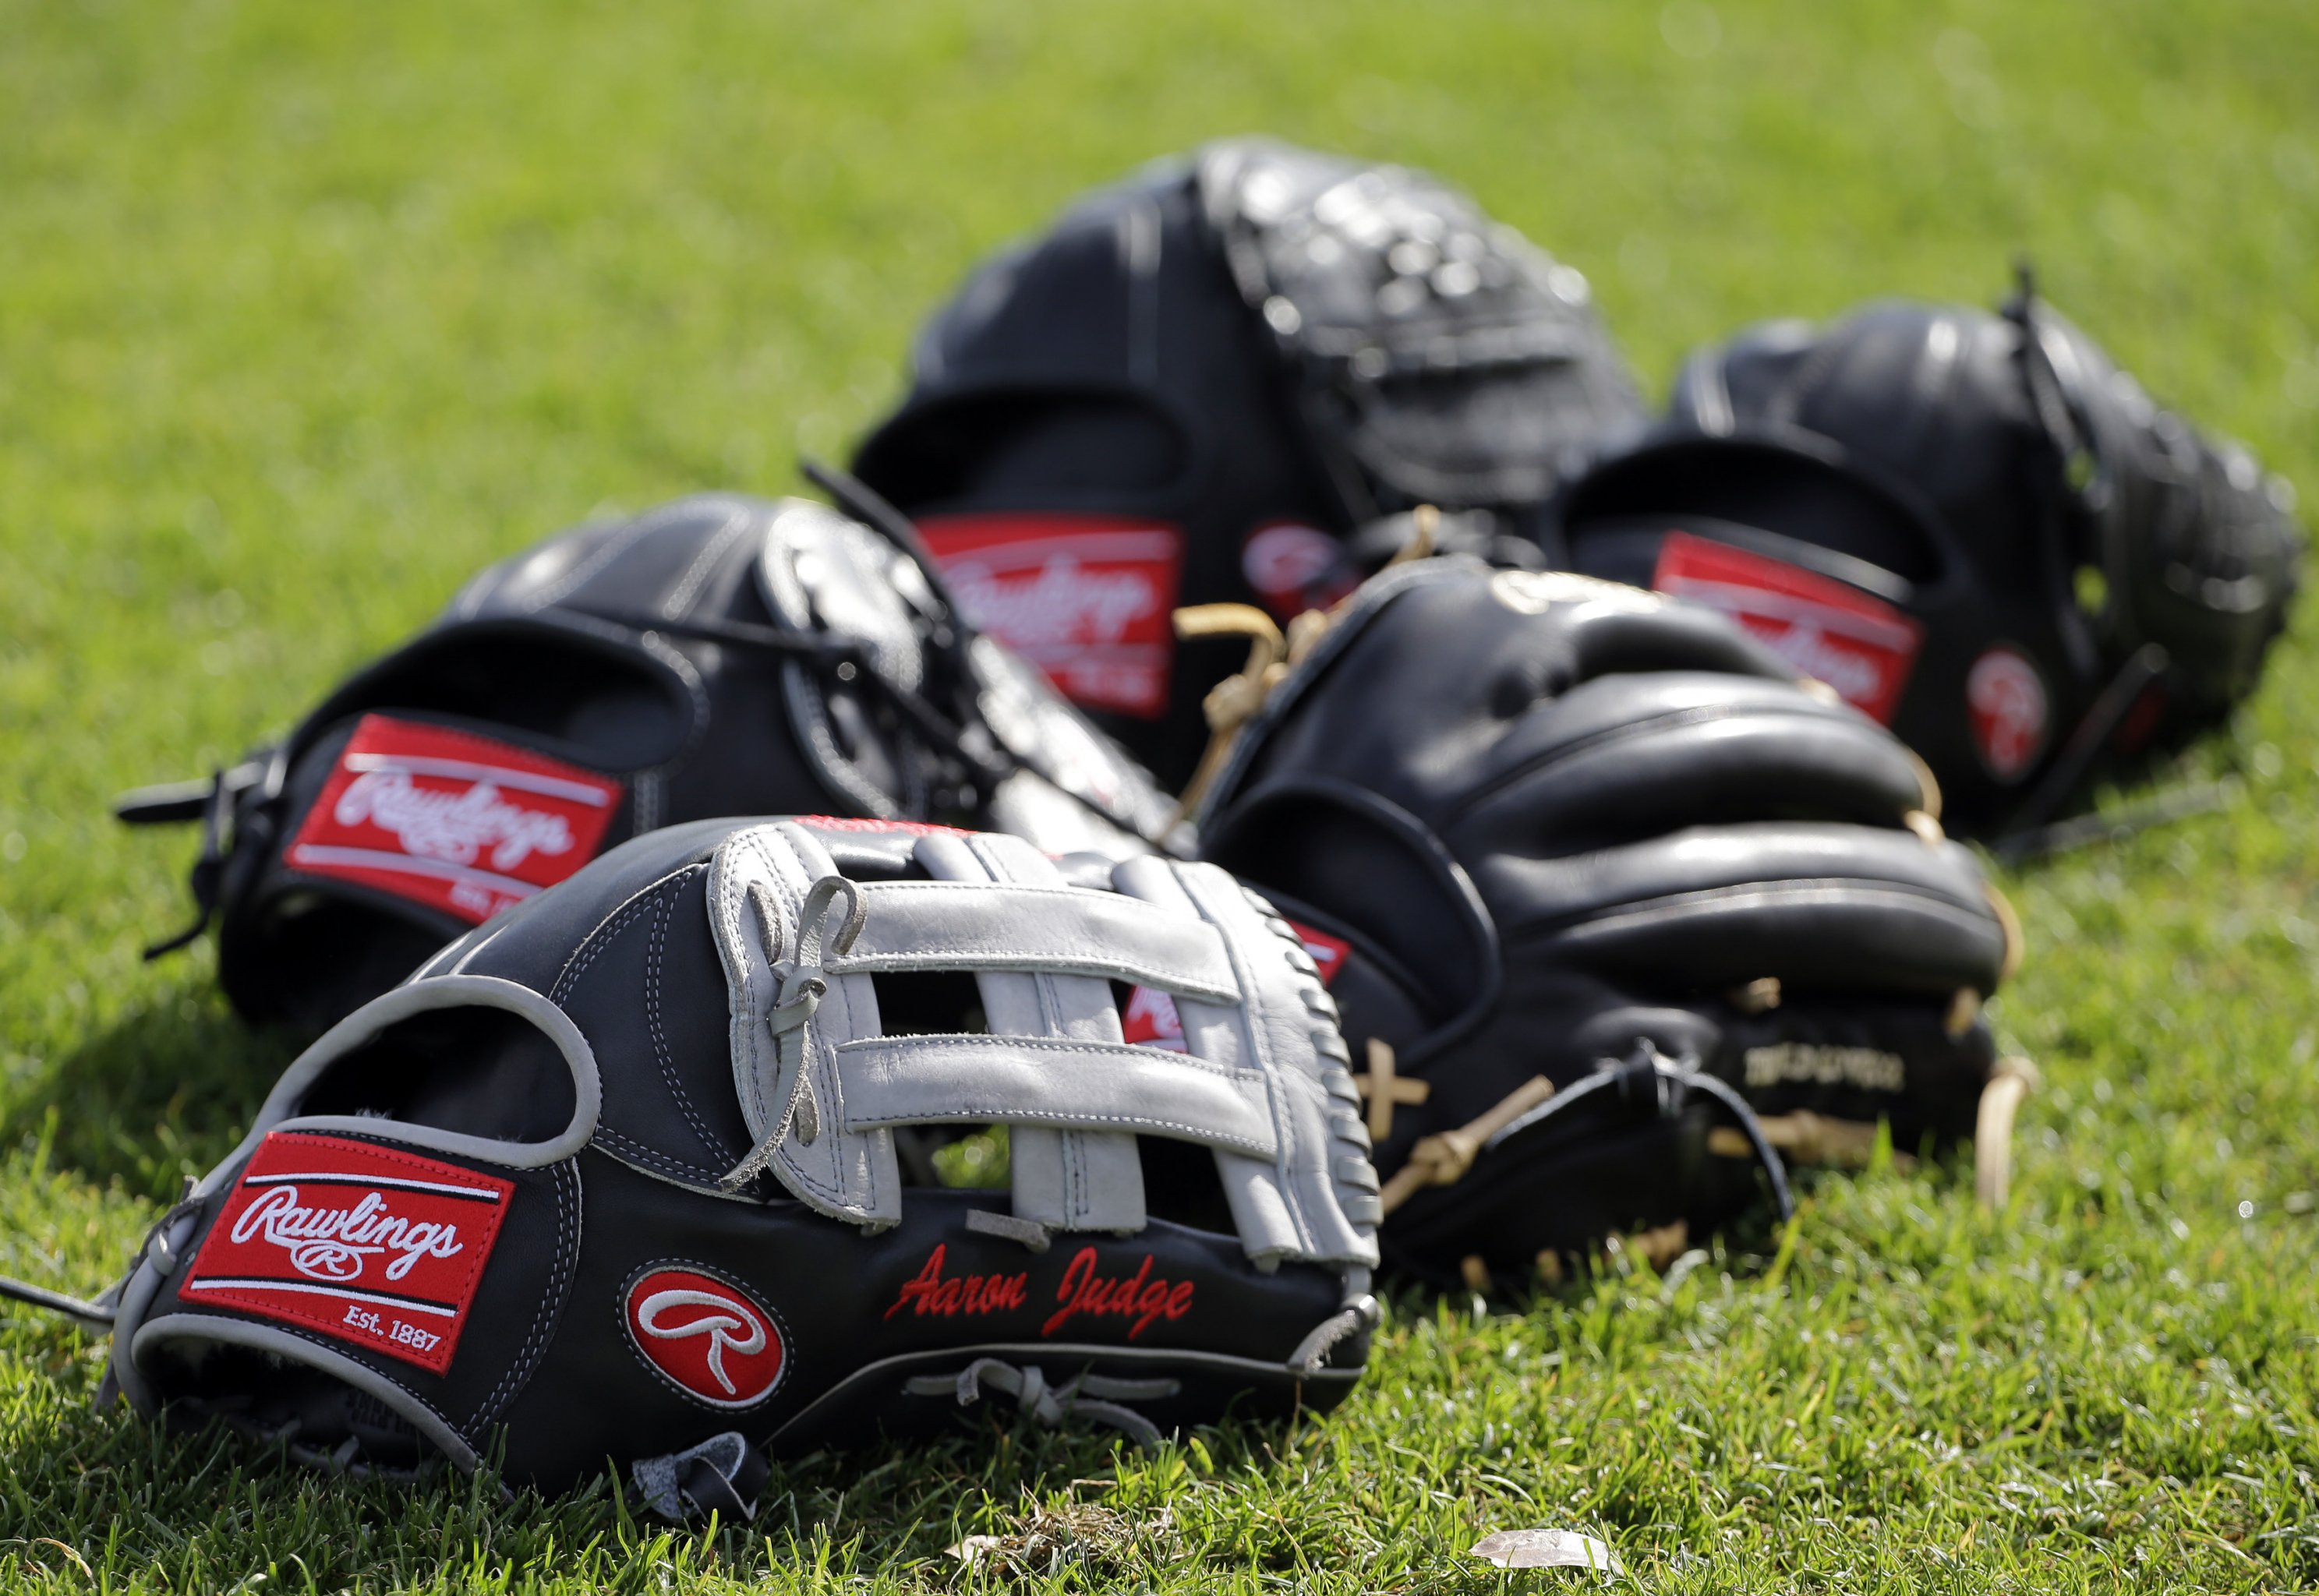 Best Baseball Gloves: A Guide of What Models the Top Pros Use